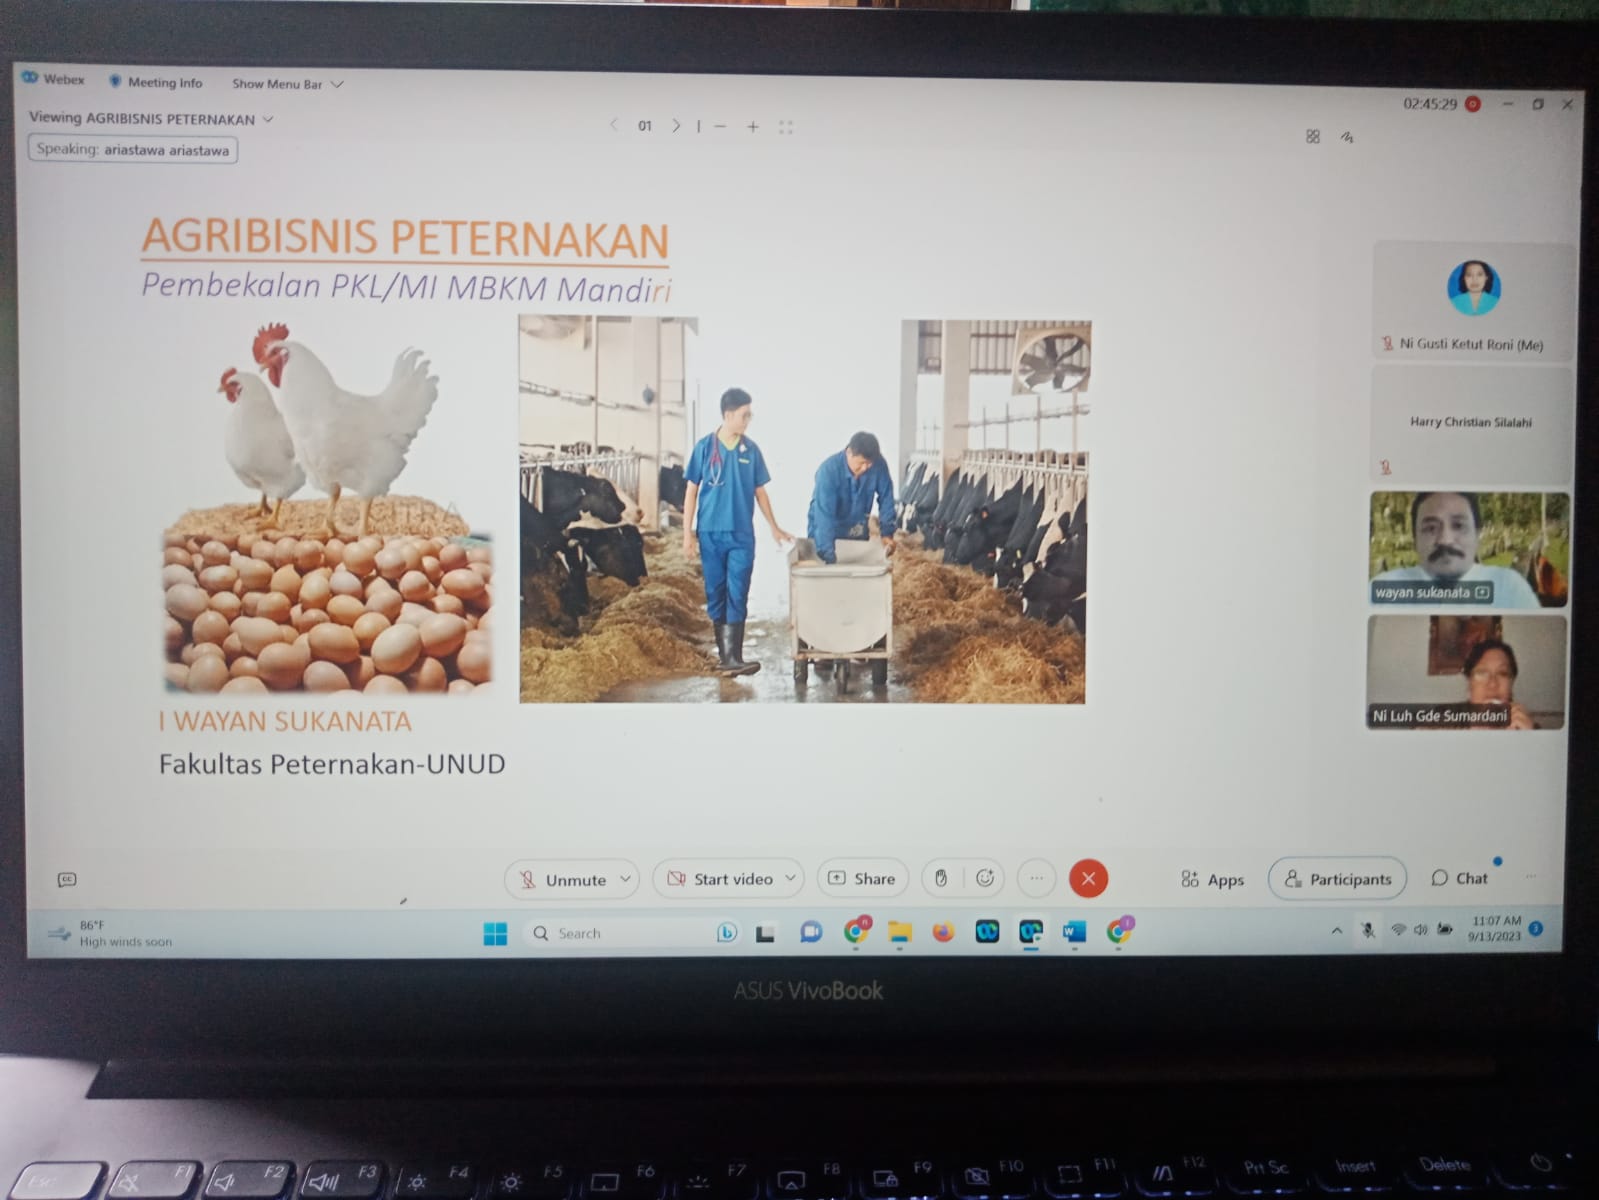 Increasing Student Insights, Bachelor of Animal Husbandry Study Program, Faculty of Animal Husbandry Unud Holds Debriefing for Students Participating in Independent MBKM Industry PKL/Internships in 2023 Day 2